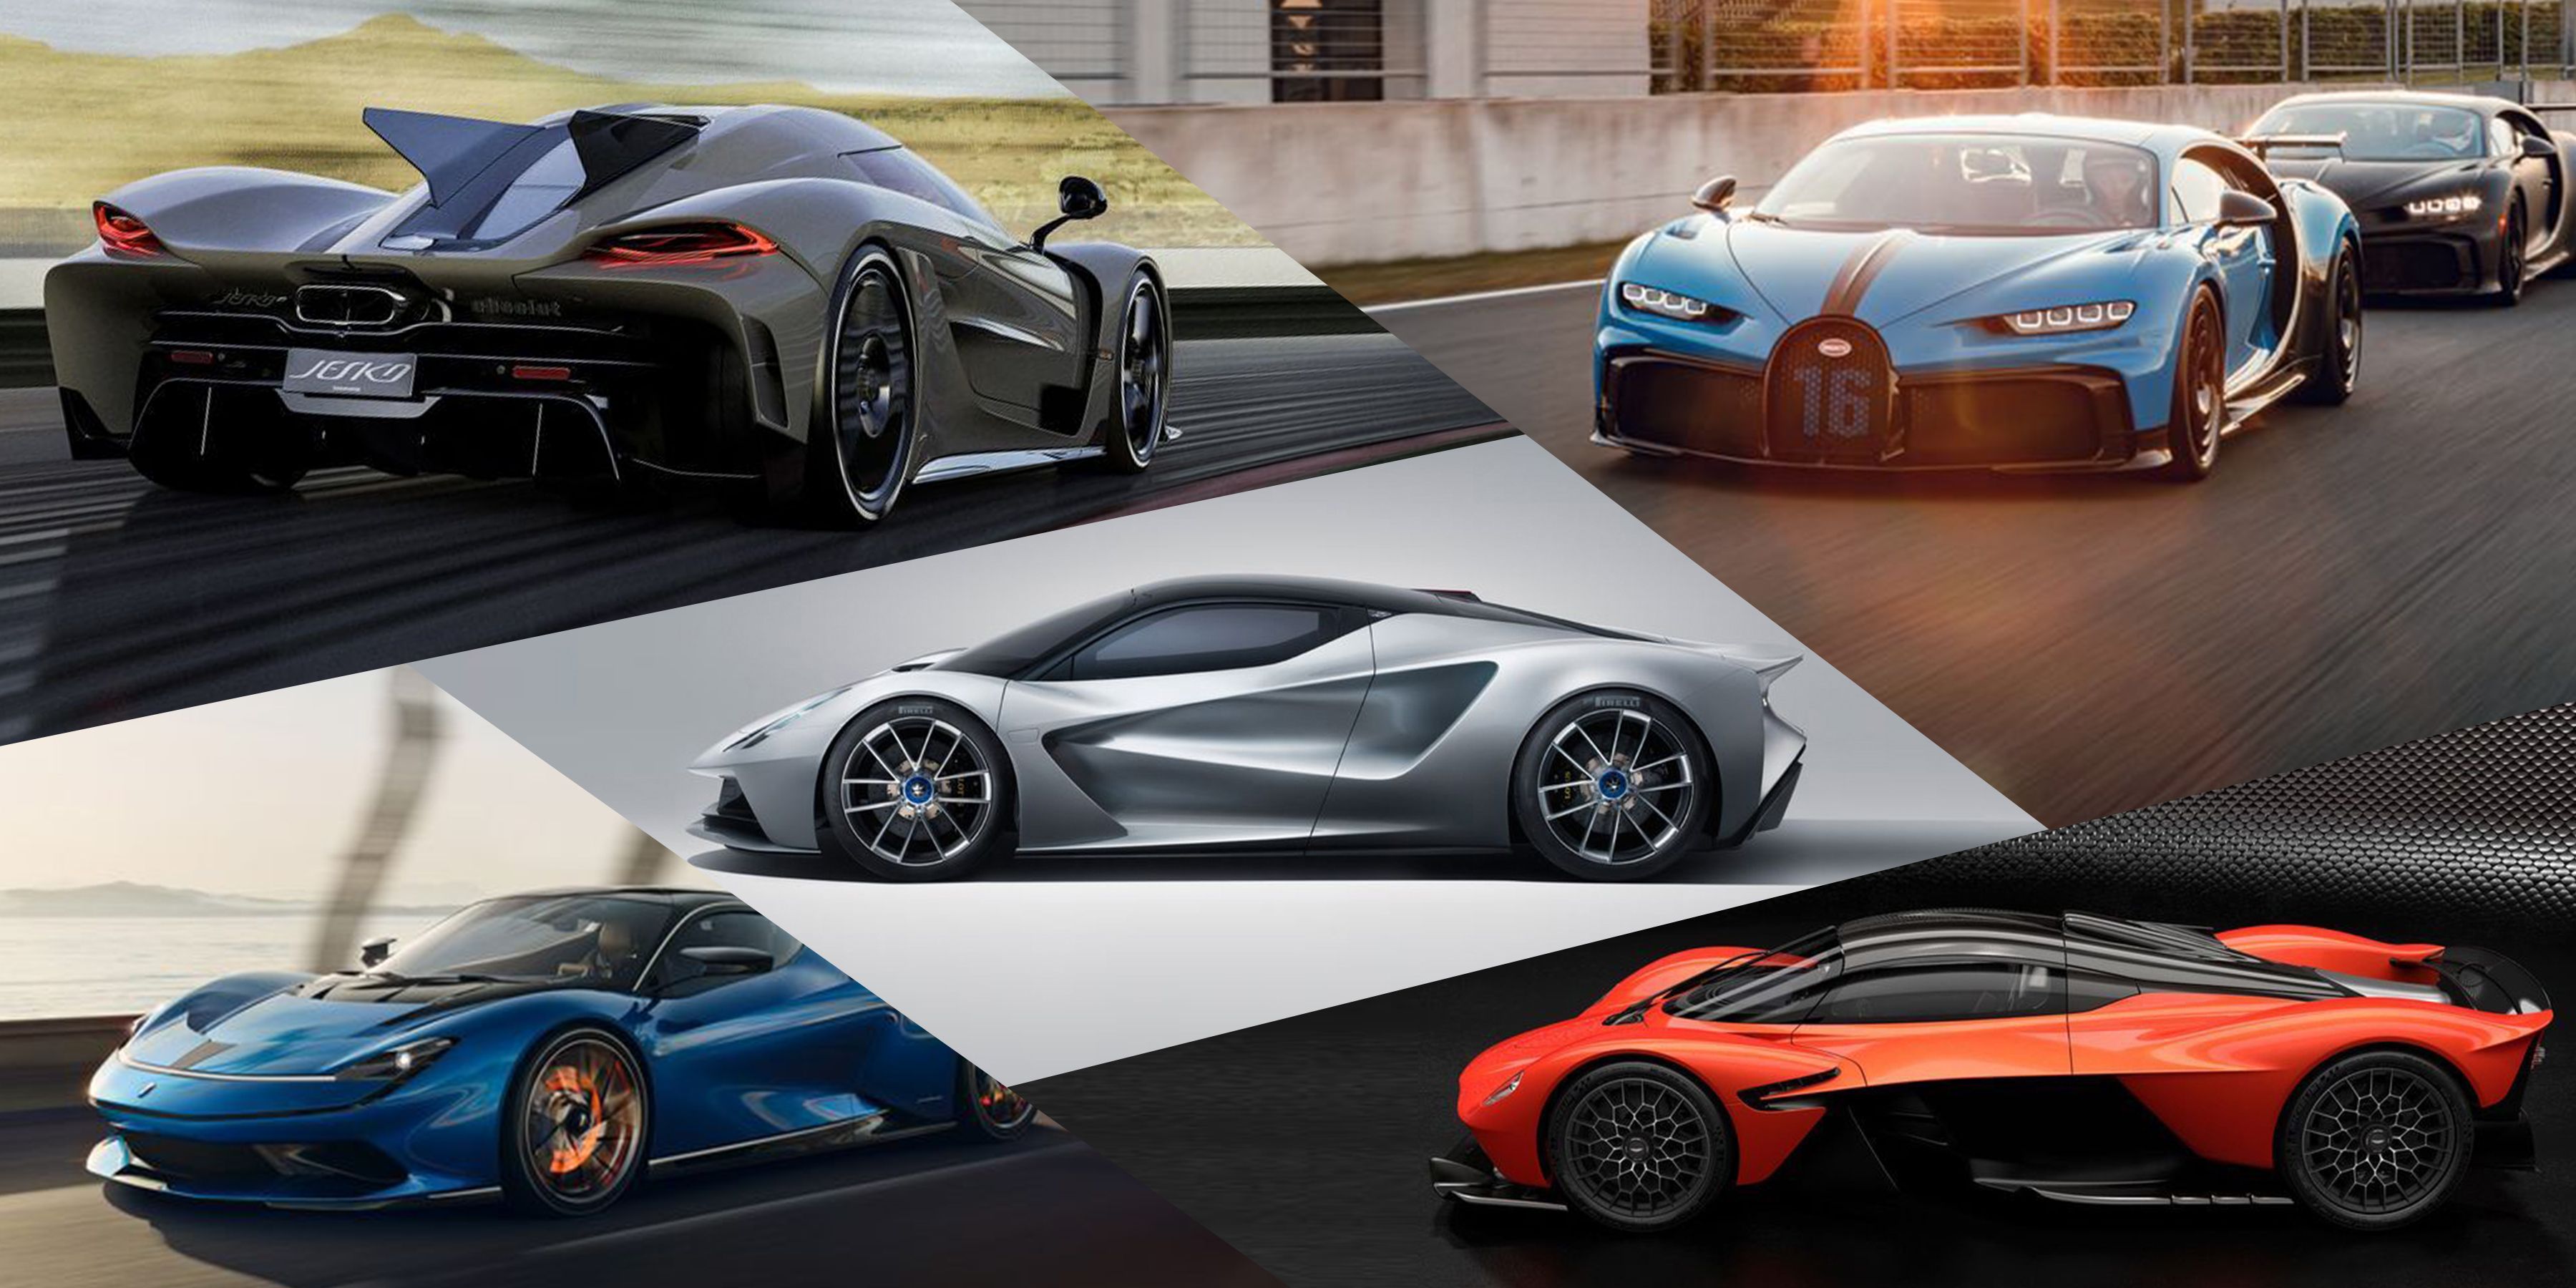 All the 1,000-HP Supercars in the World